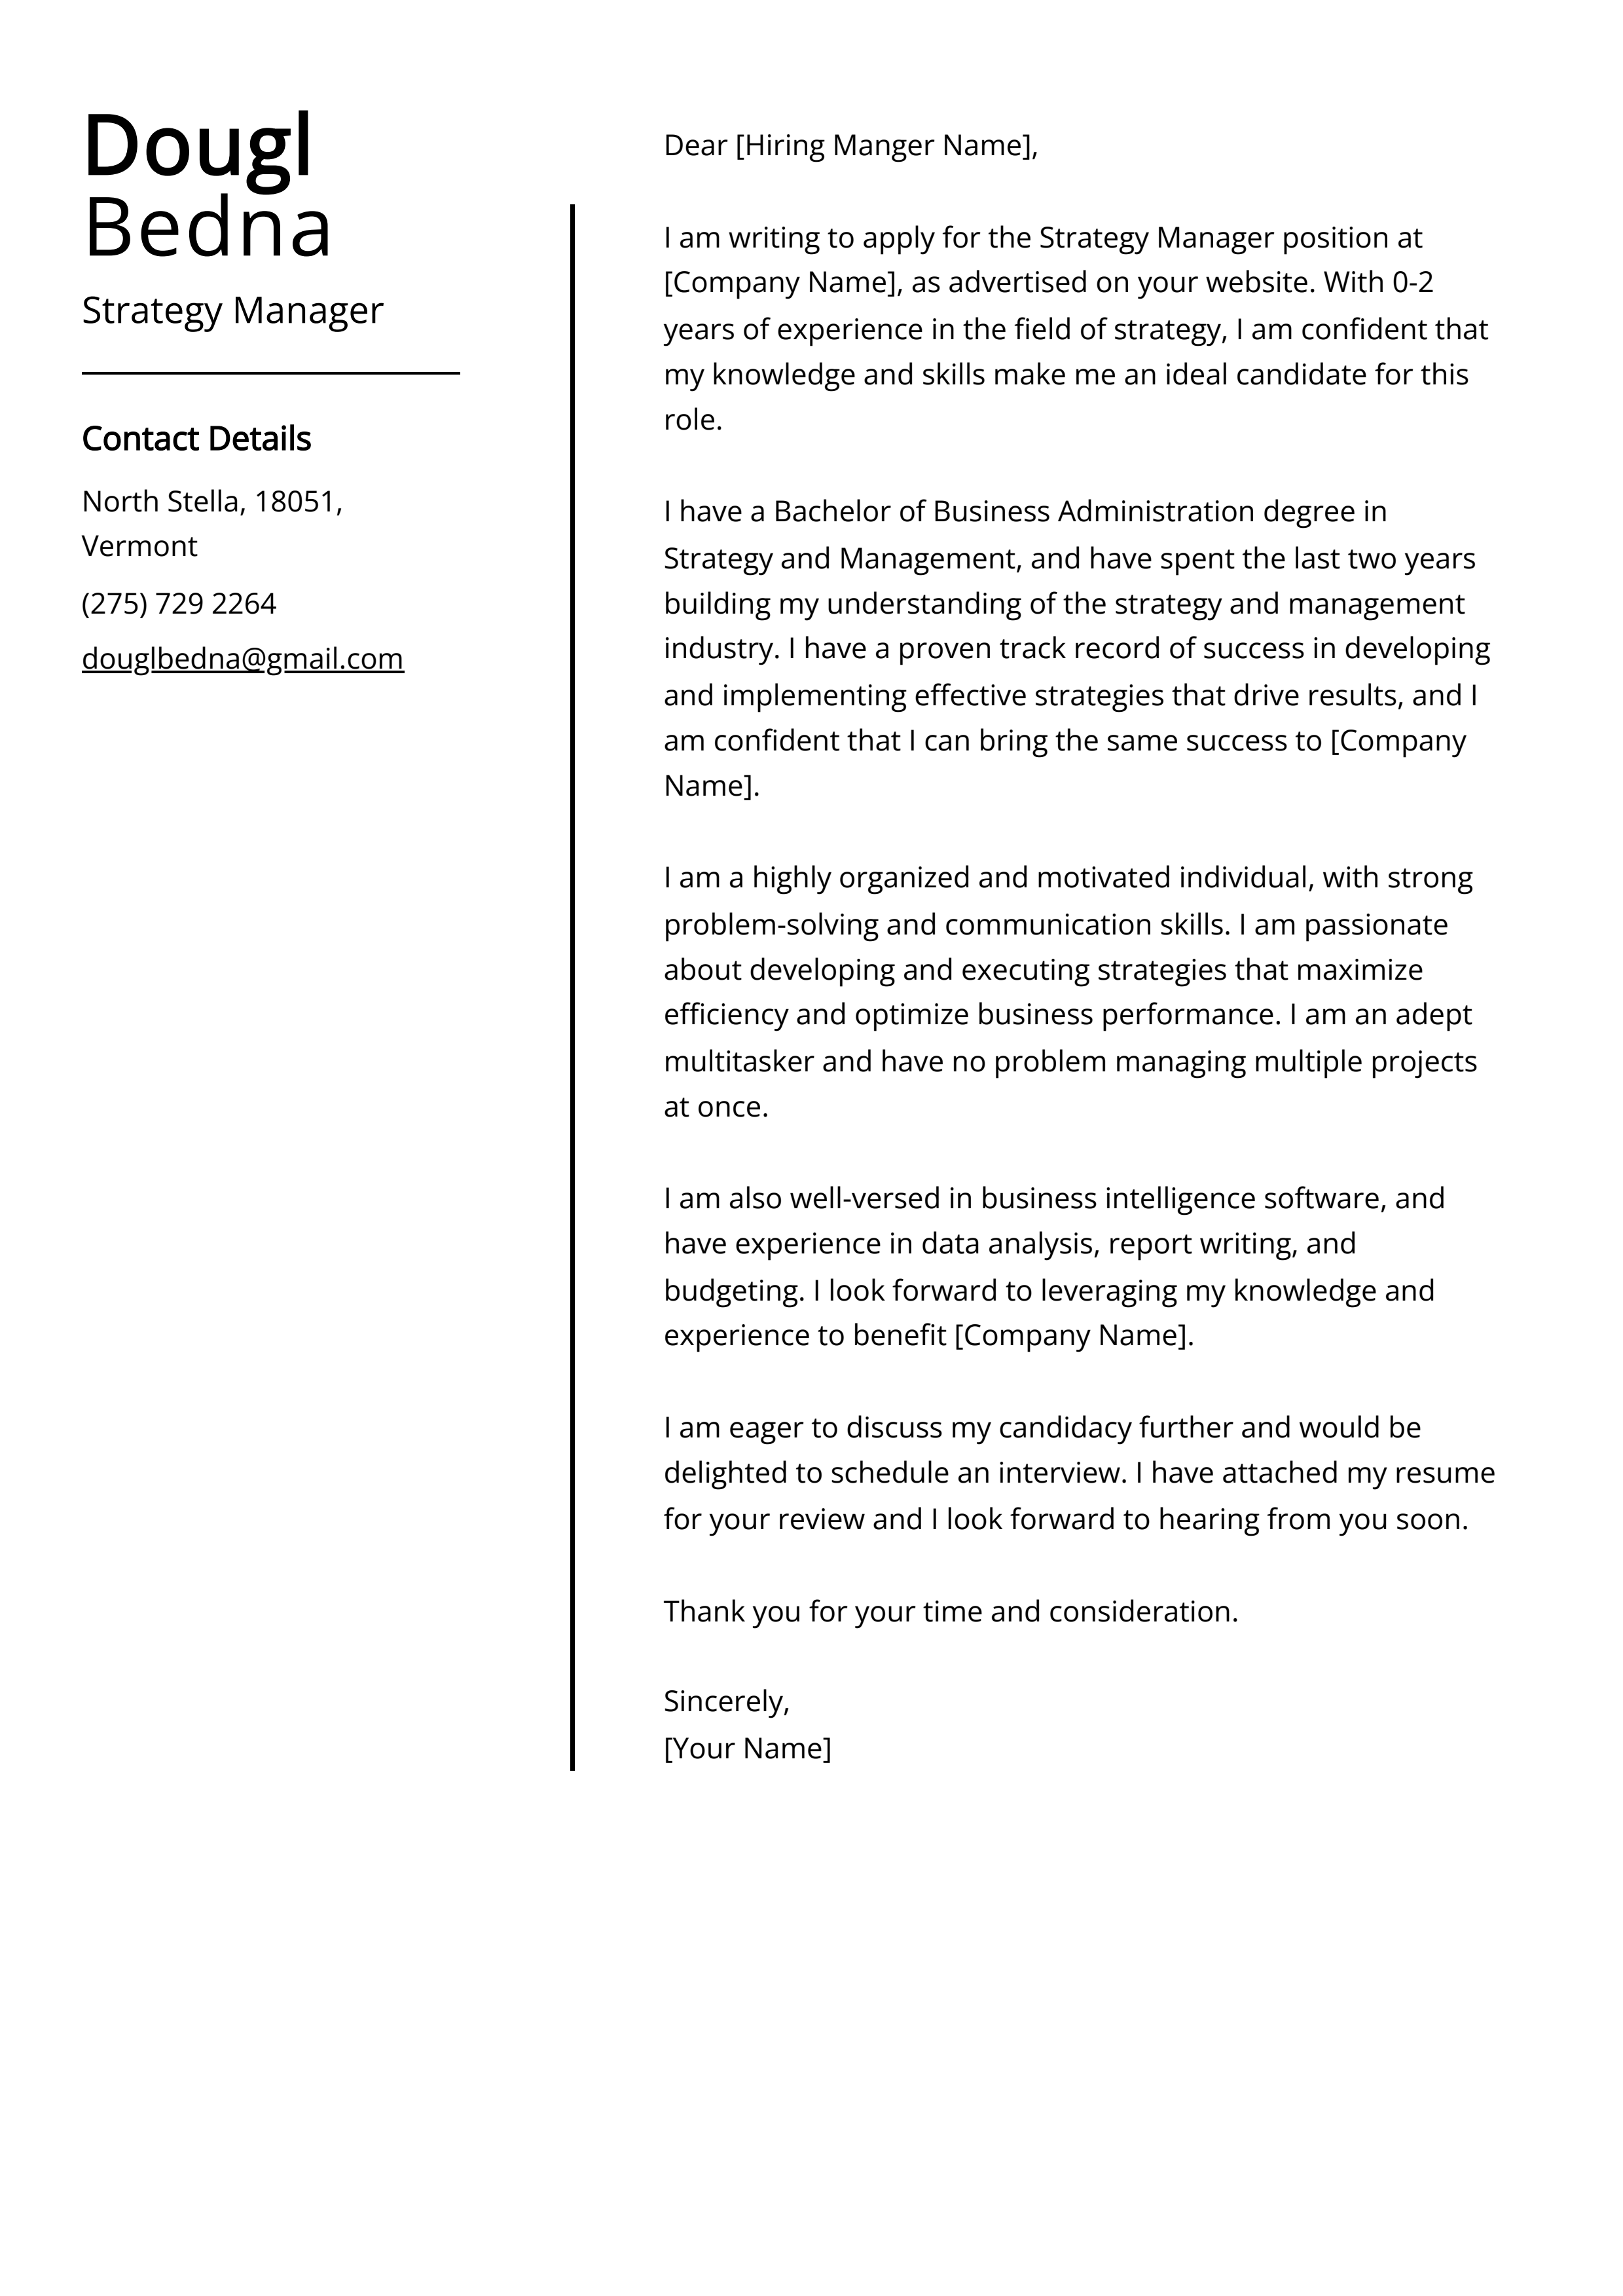 Strategy Manager Cover Letter Example